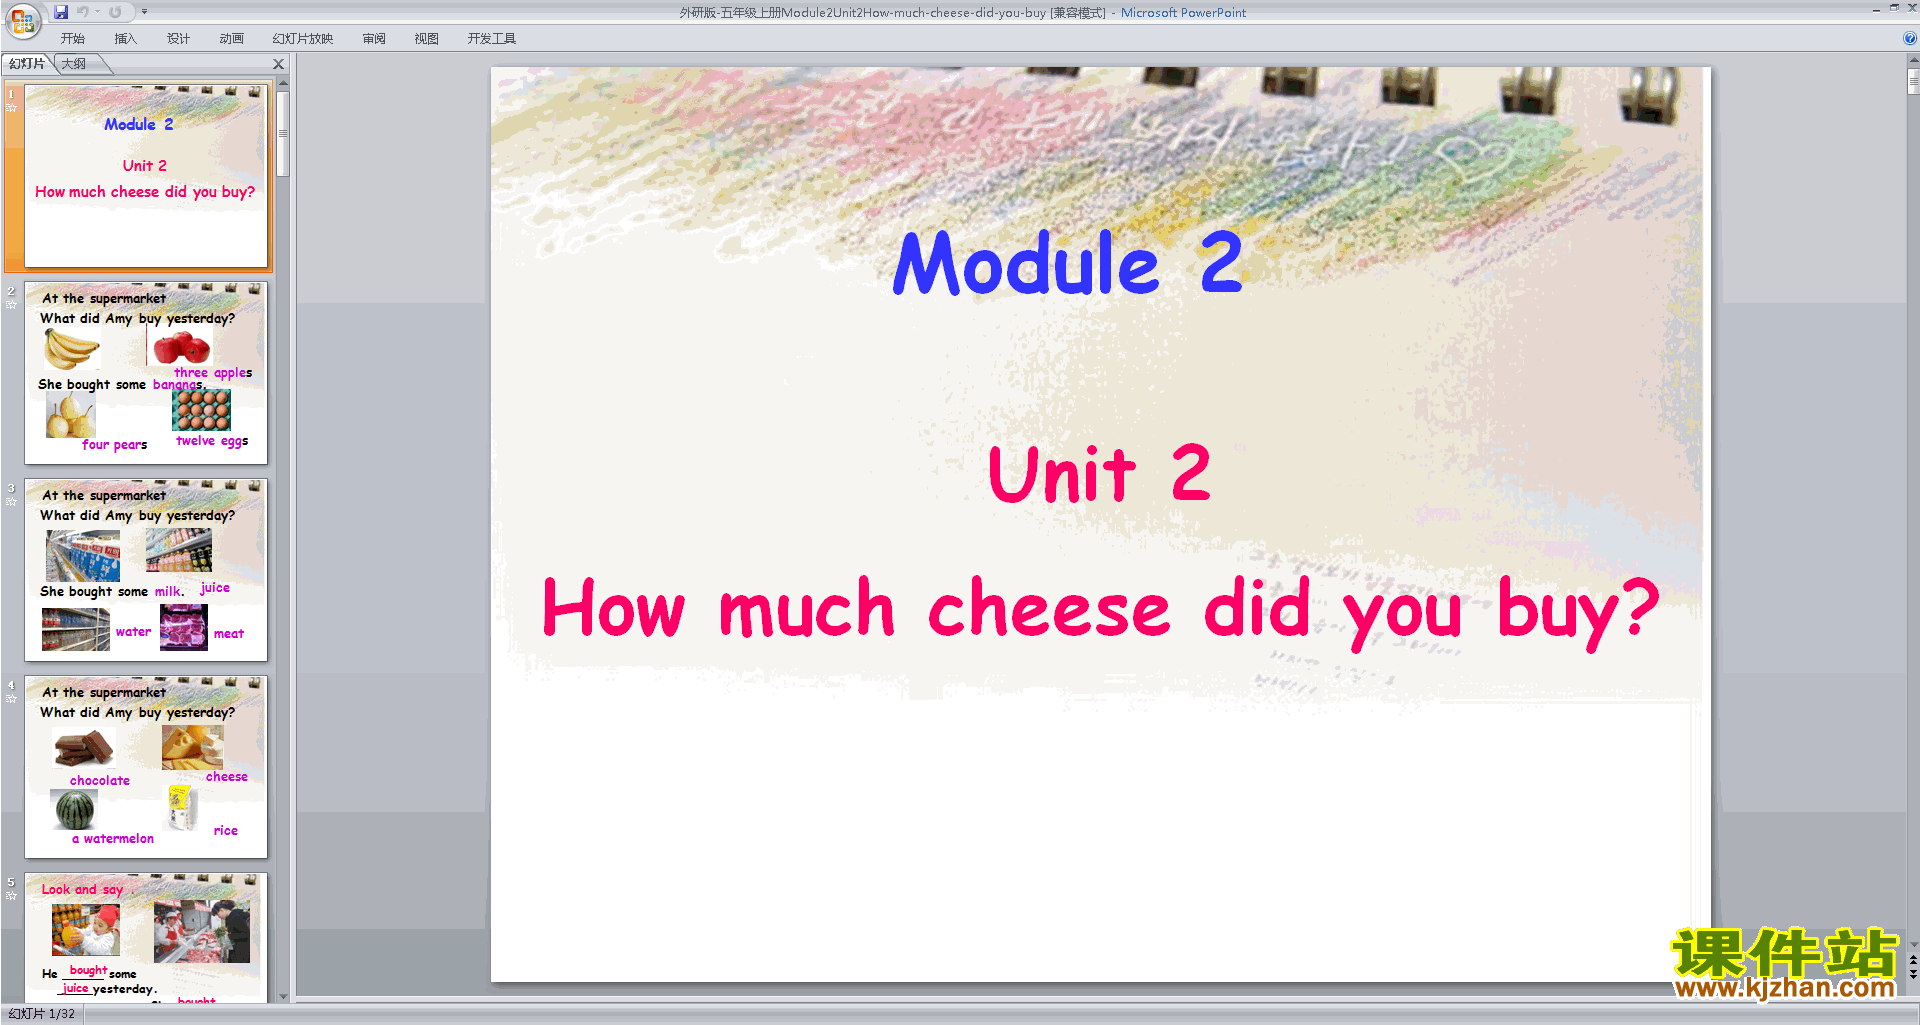 Module2 Unit2 How much cheese did you buypptμ